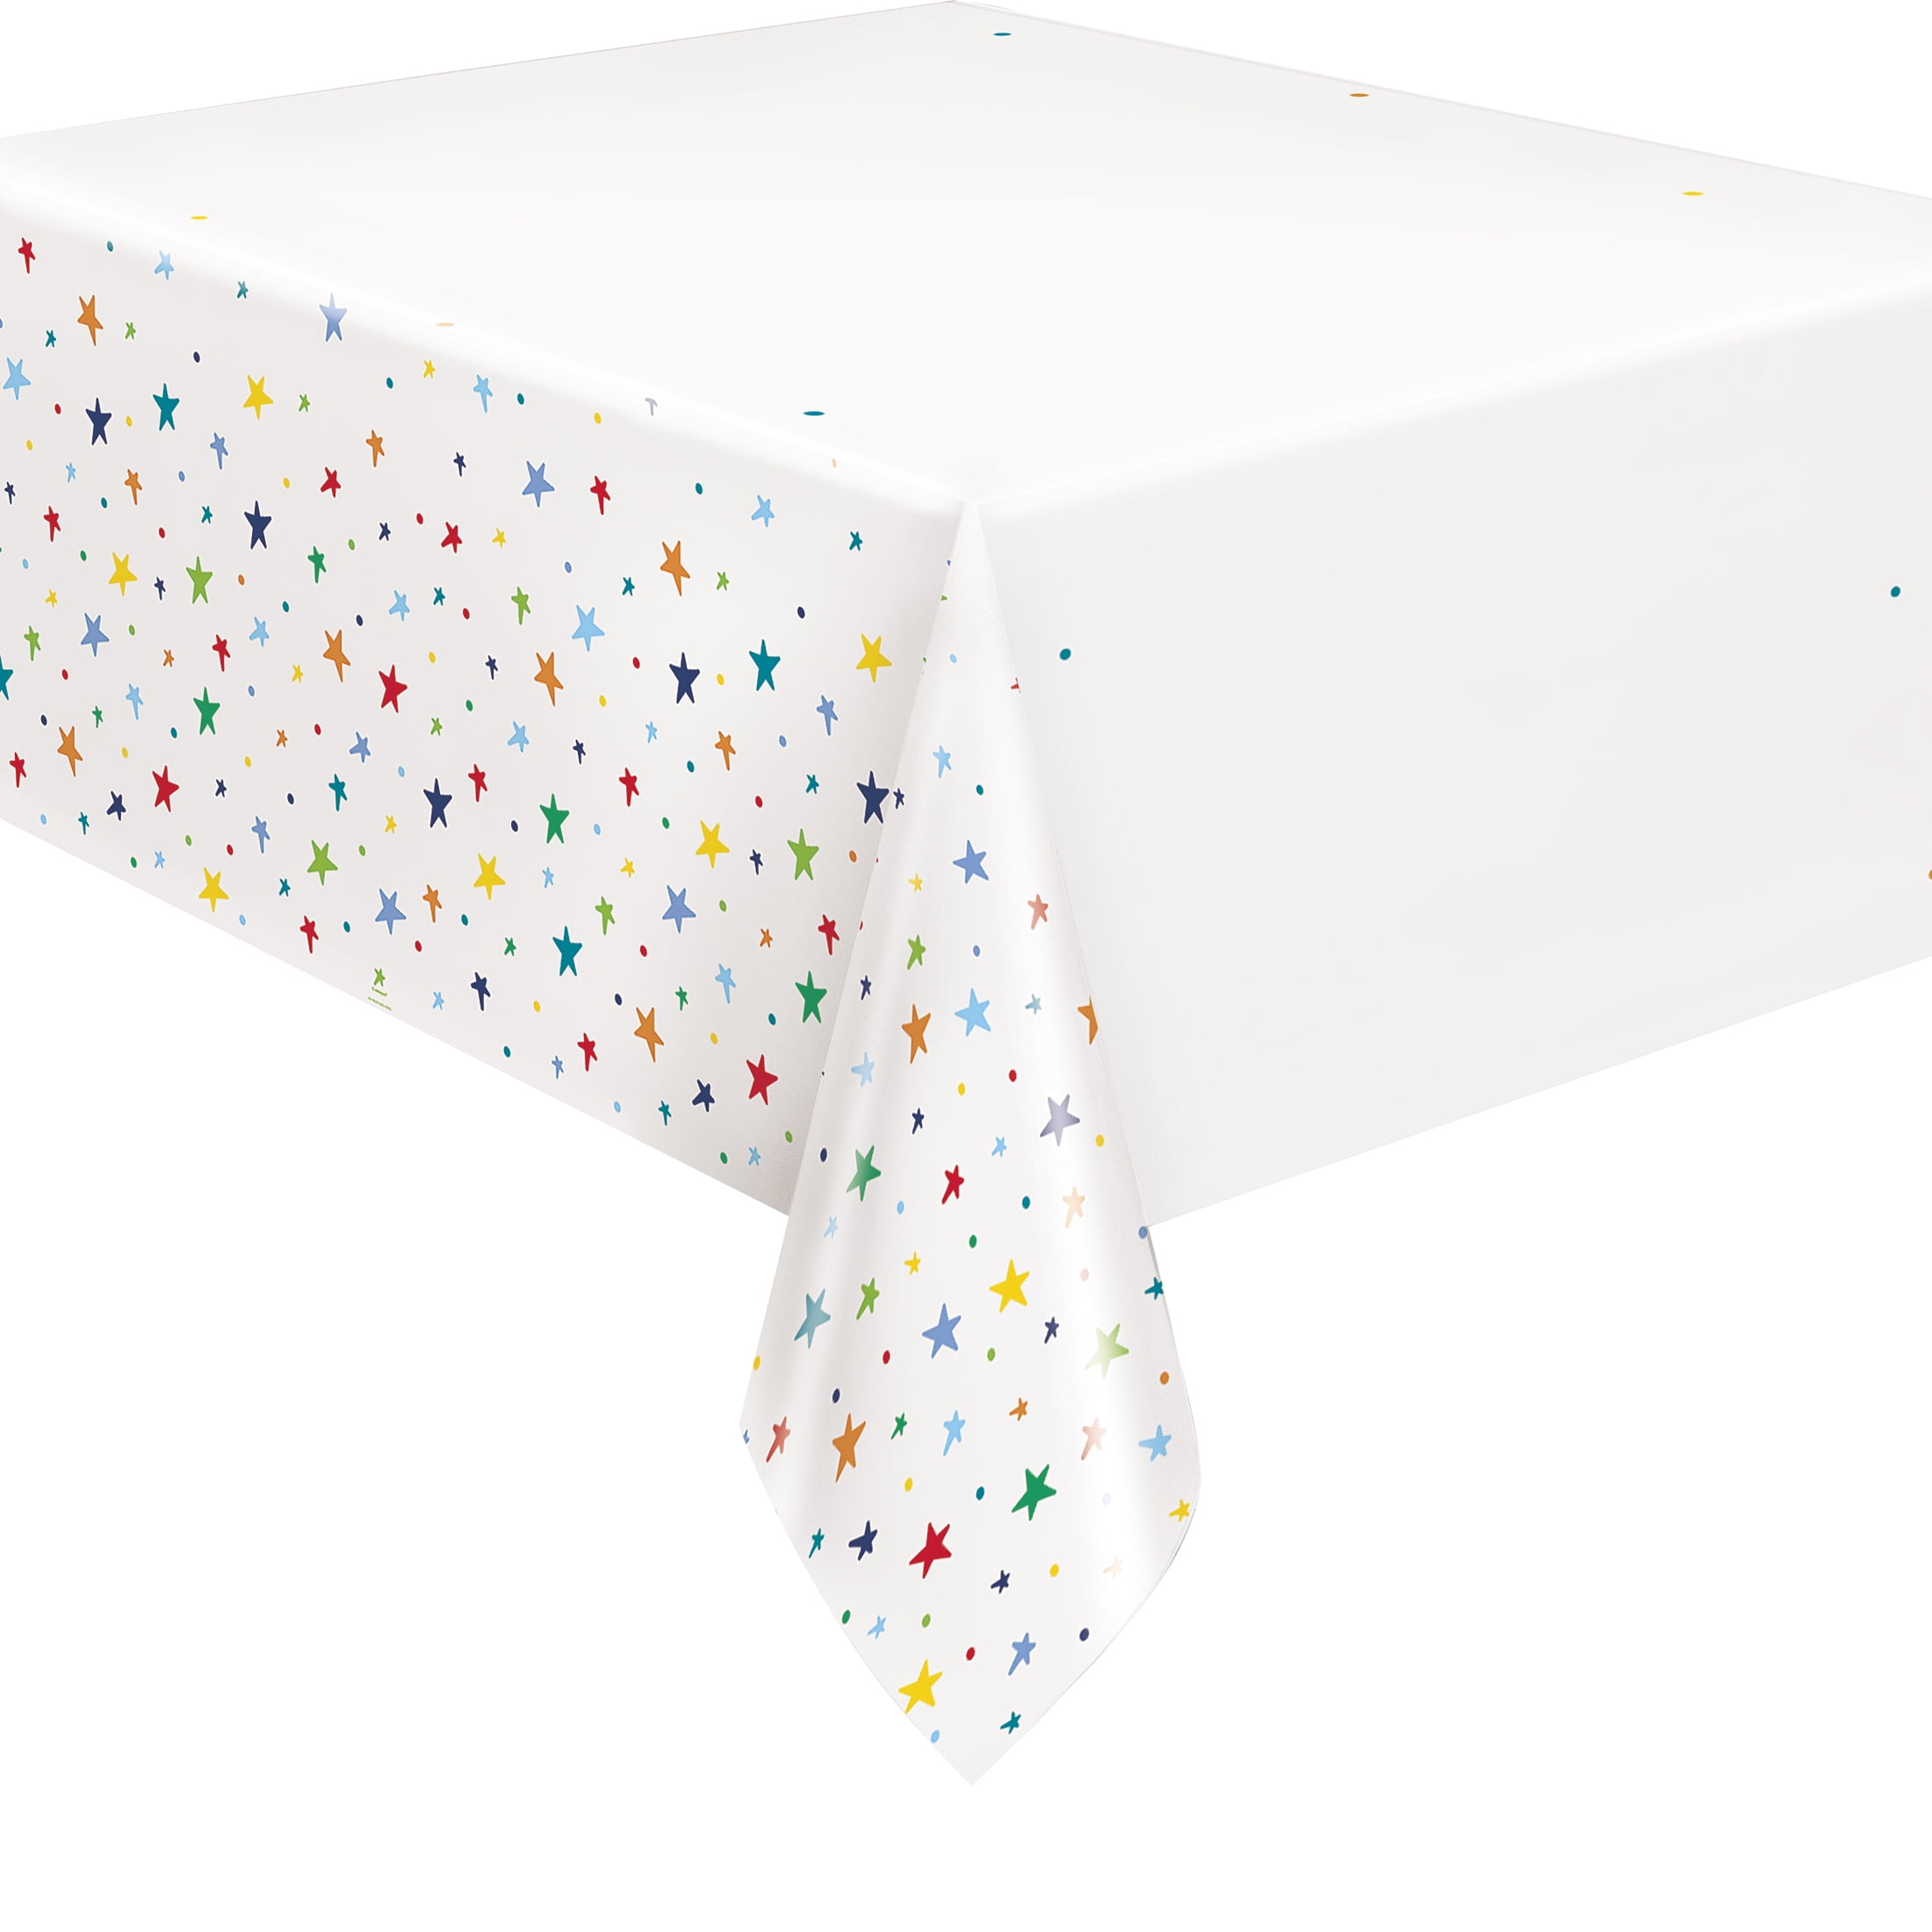 Confetti Sprinkles Party Birthday Cotton Dinner Napkins by Roostery Set of 2 